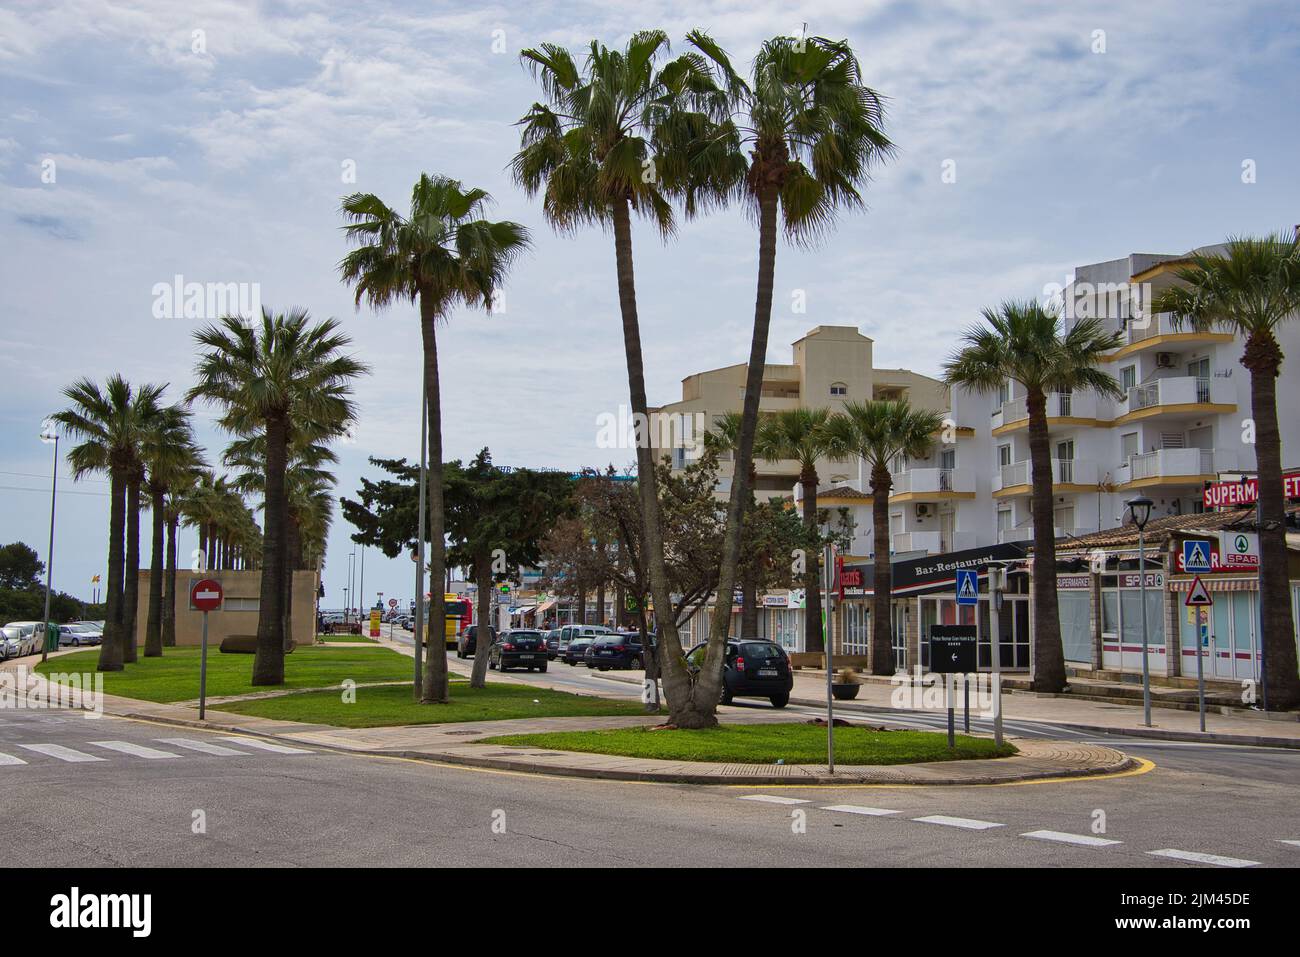 Picture shows a street in Sa Coma, Mallorca with palm trees, a supermarket and cars Stock Photo